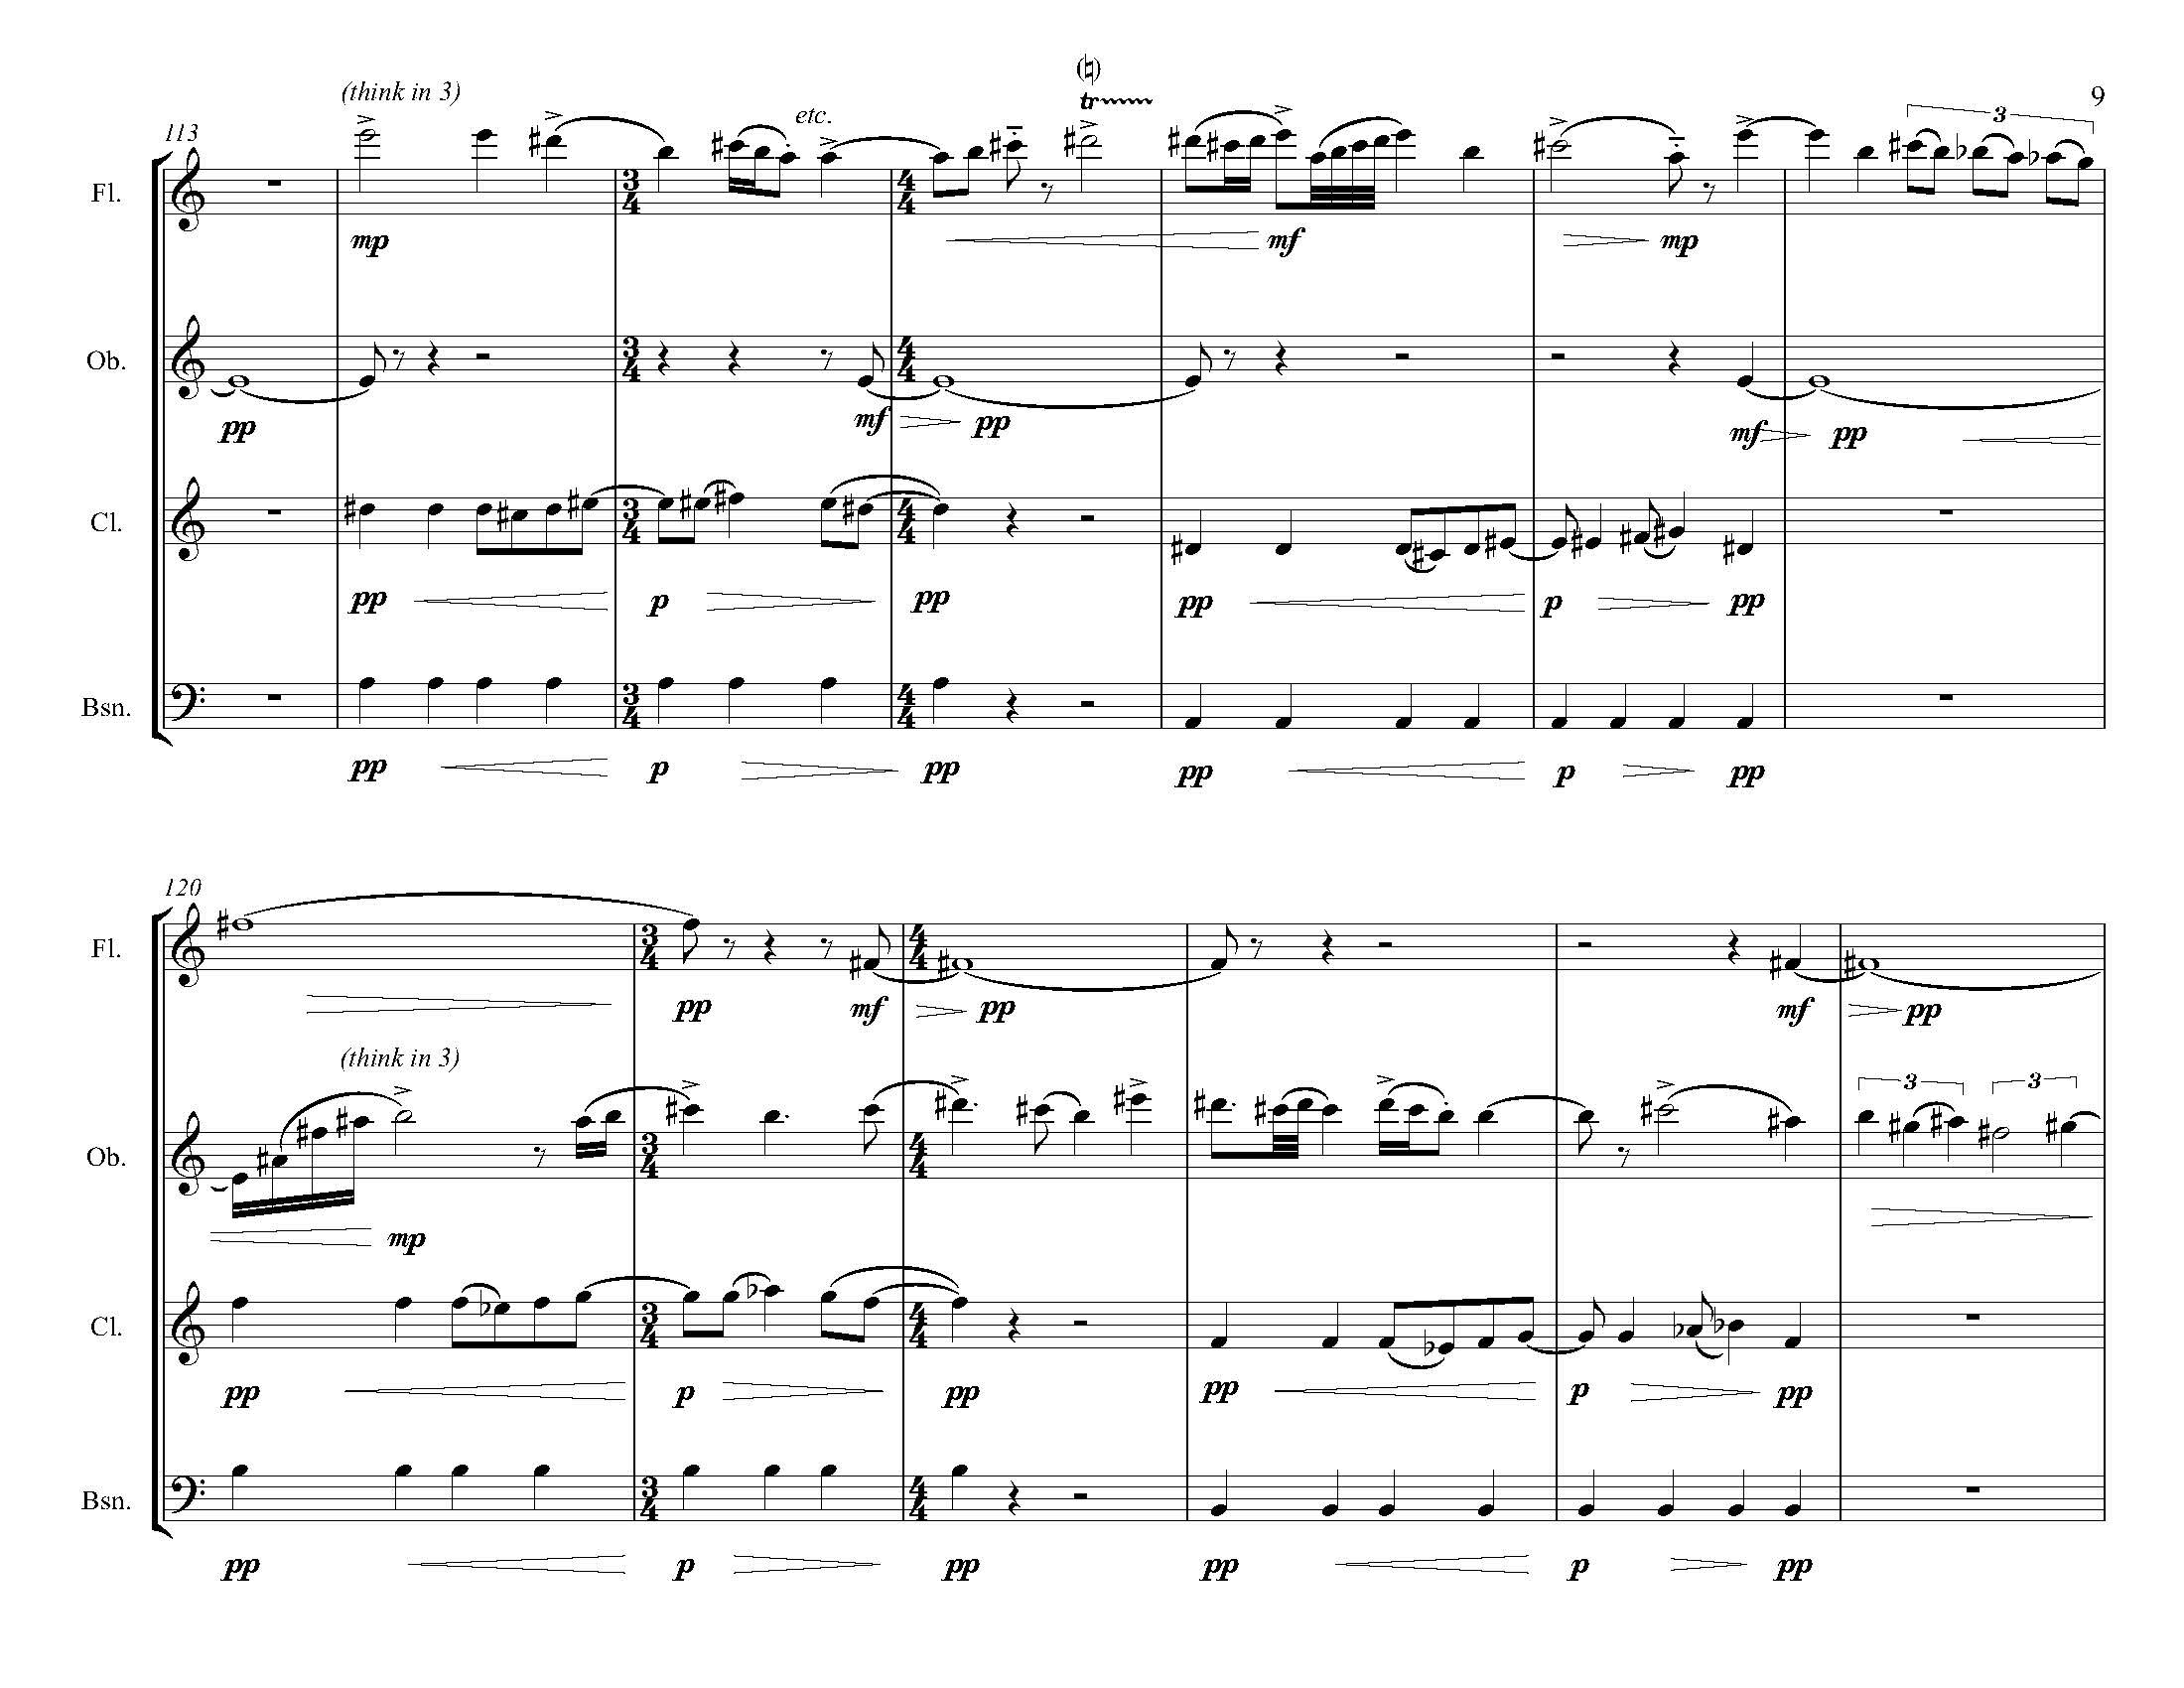 March the Twenty-Fifth - Complete Score_Page_15.jpg